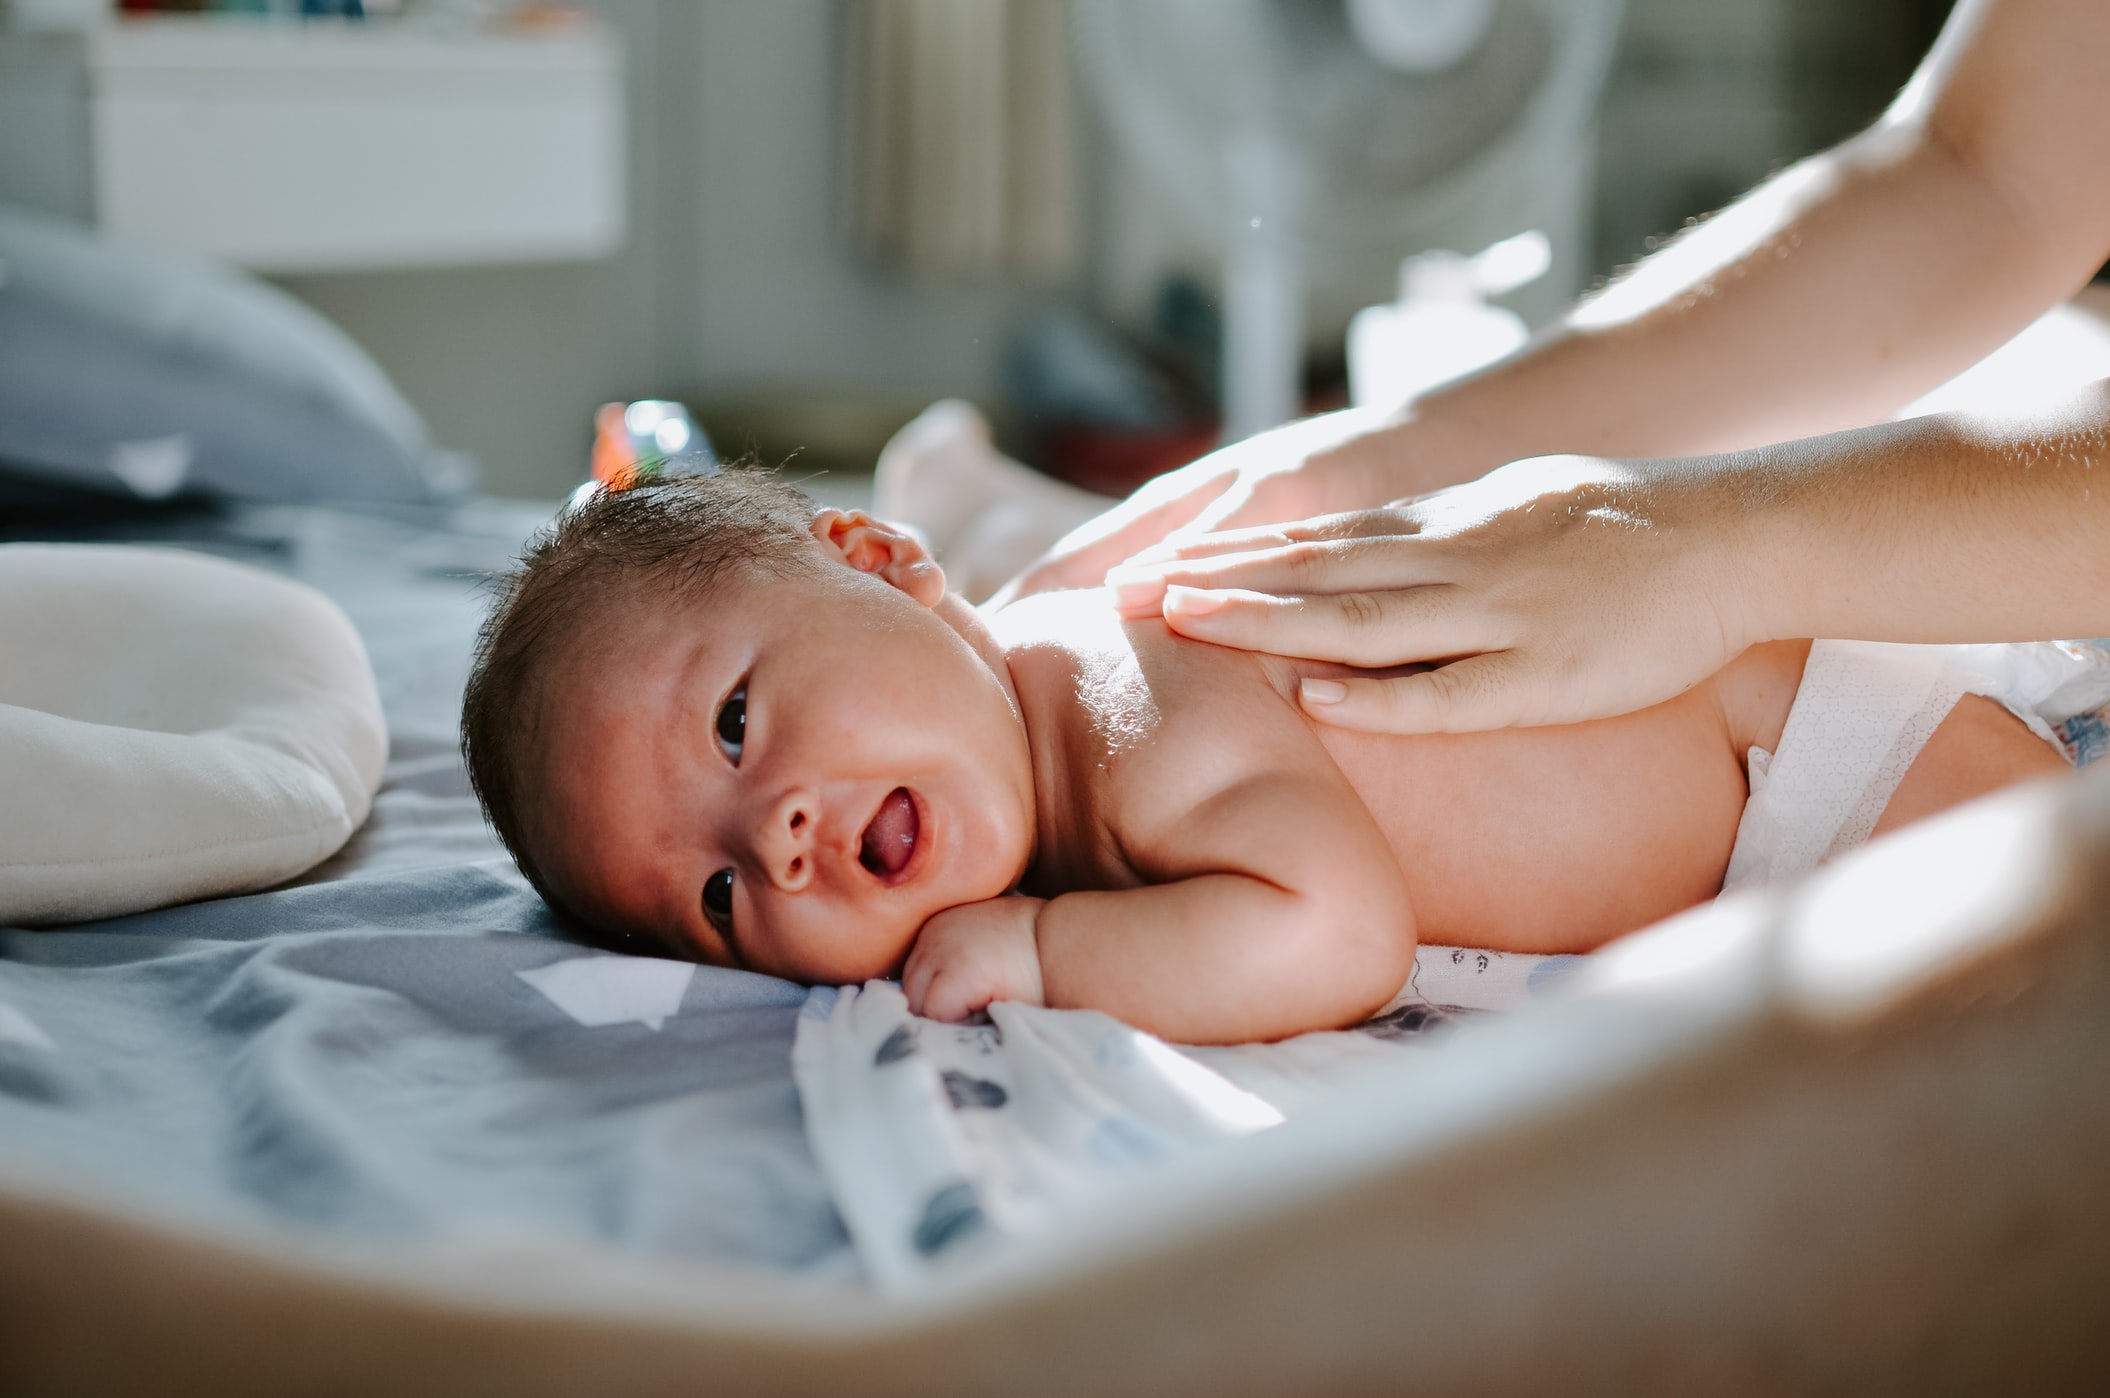 Caring for newborns during COVID-19 - Mayo Clinic Health System